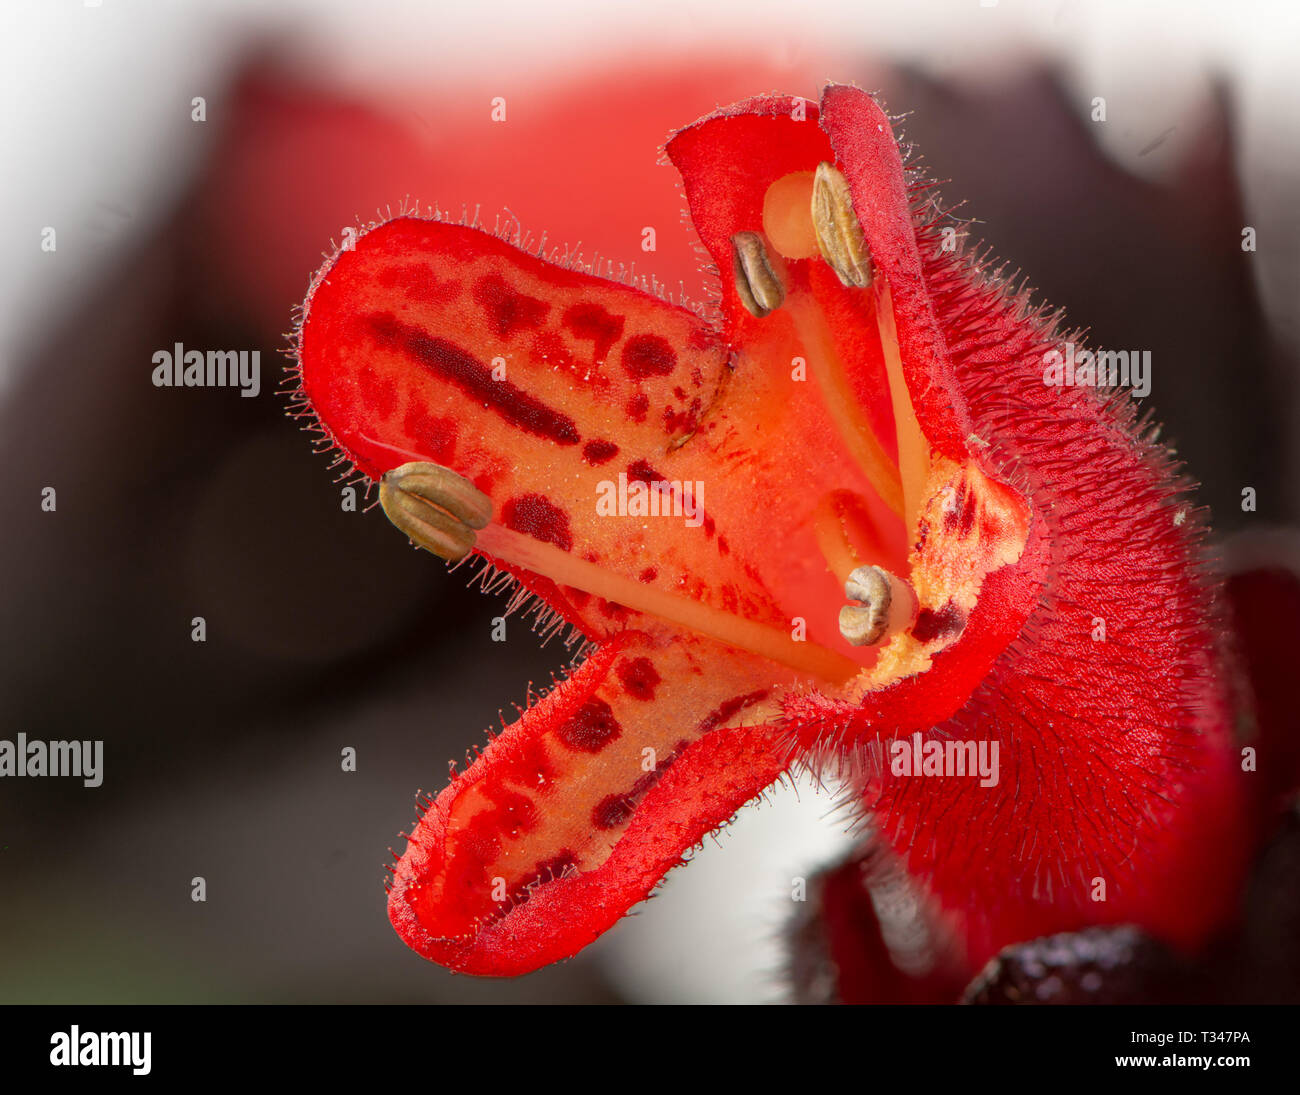 Macro of a red lipstick plant blossom Stock Photo